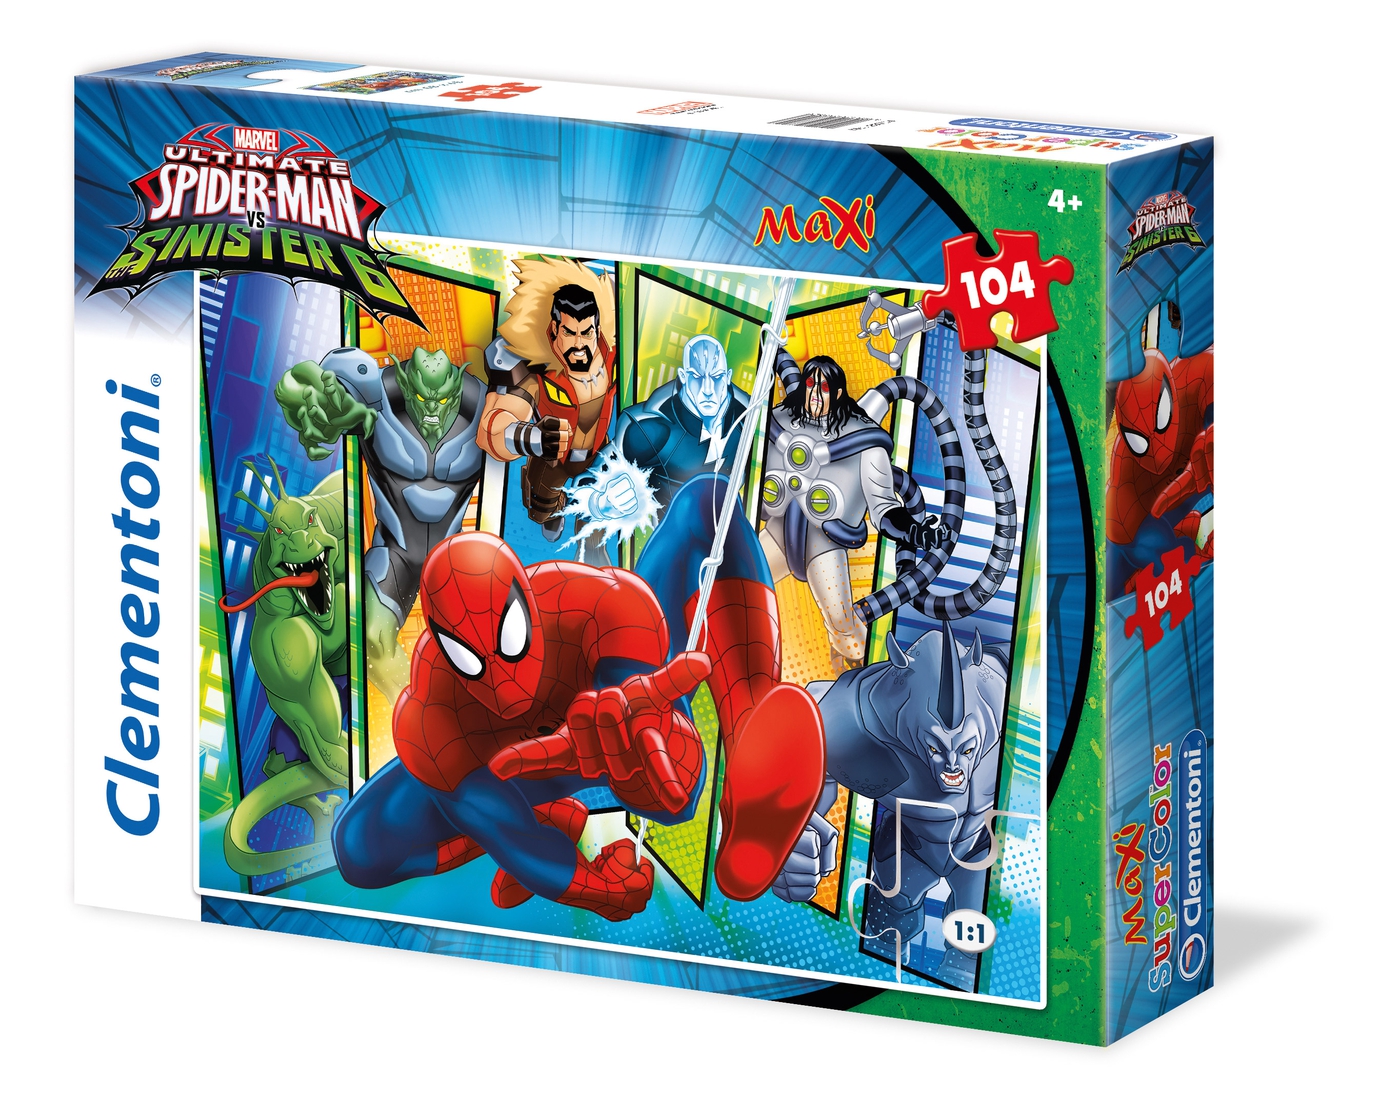 ultimate spiderman sinister 6 toy